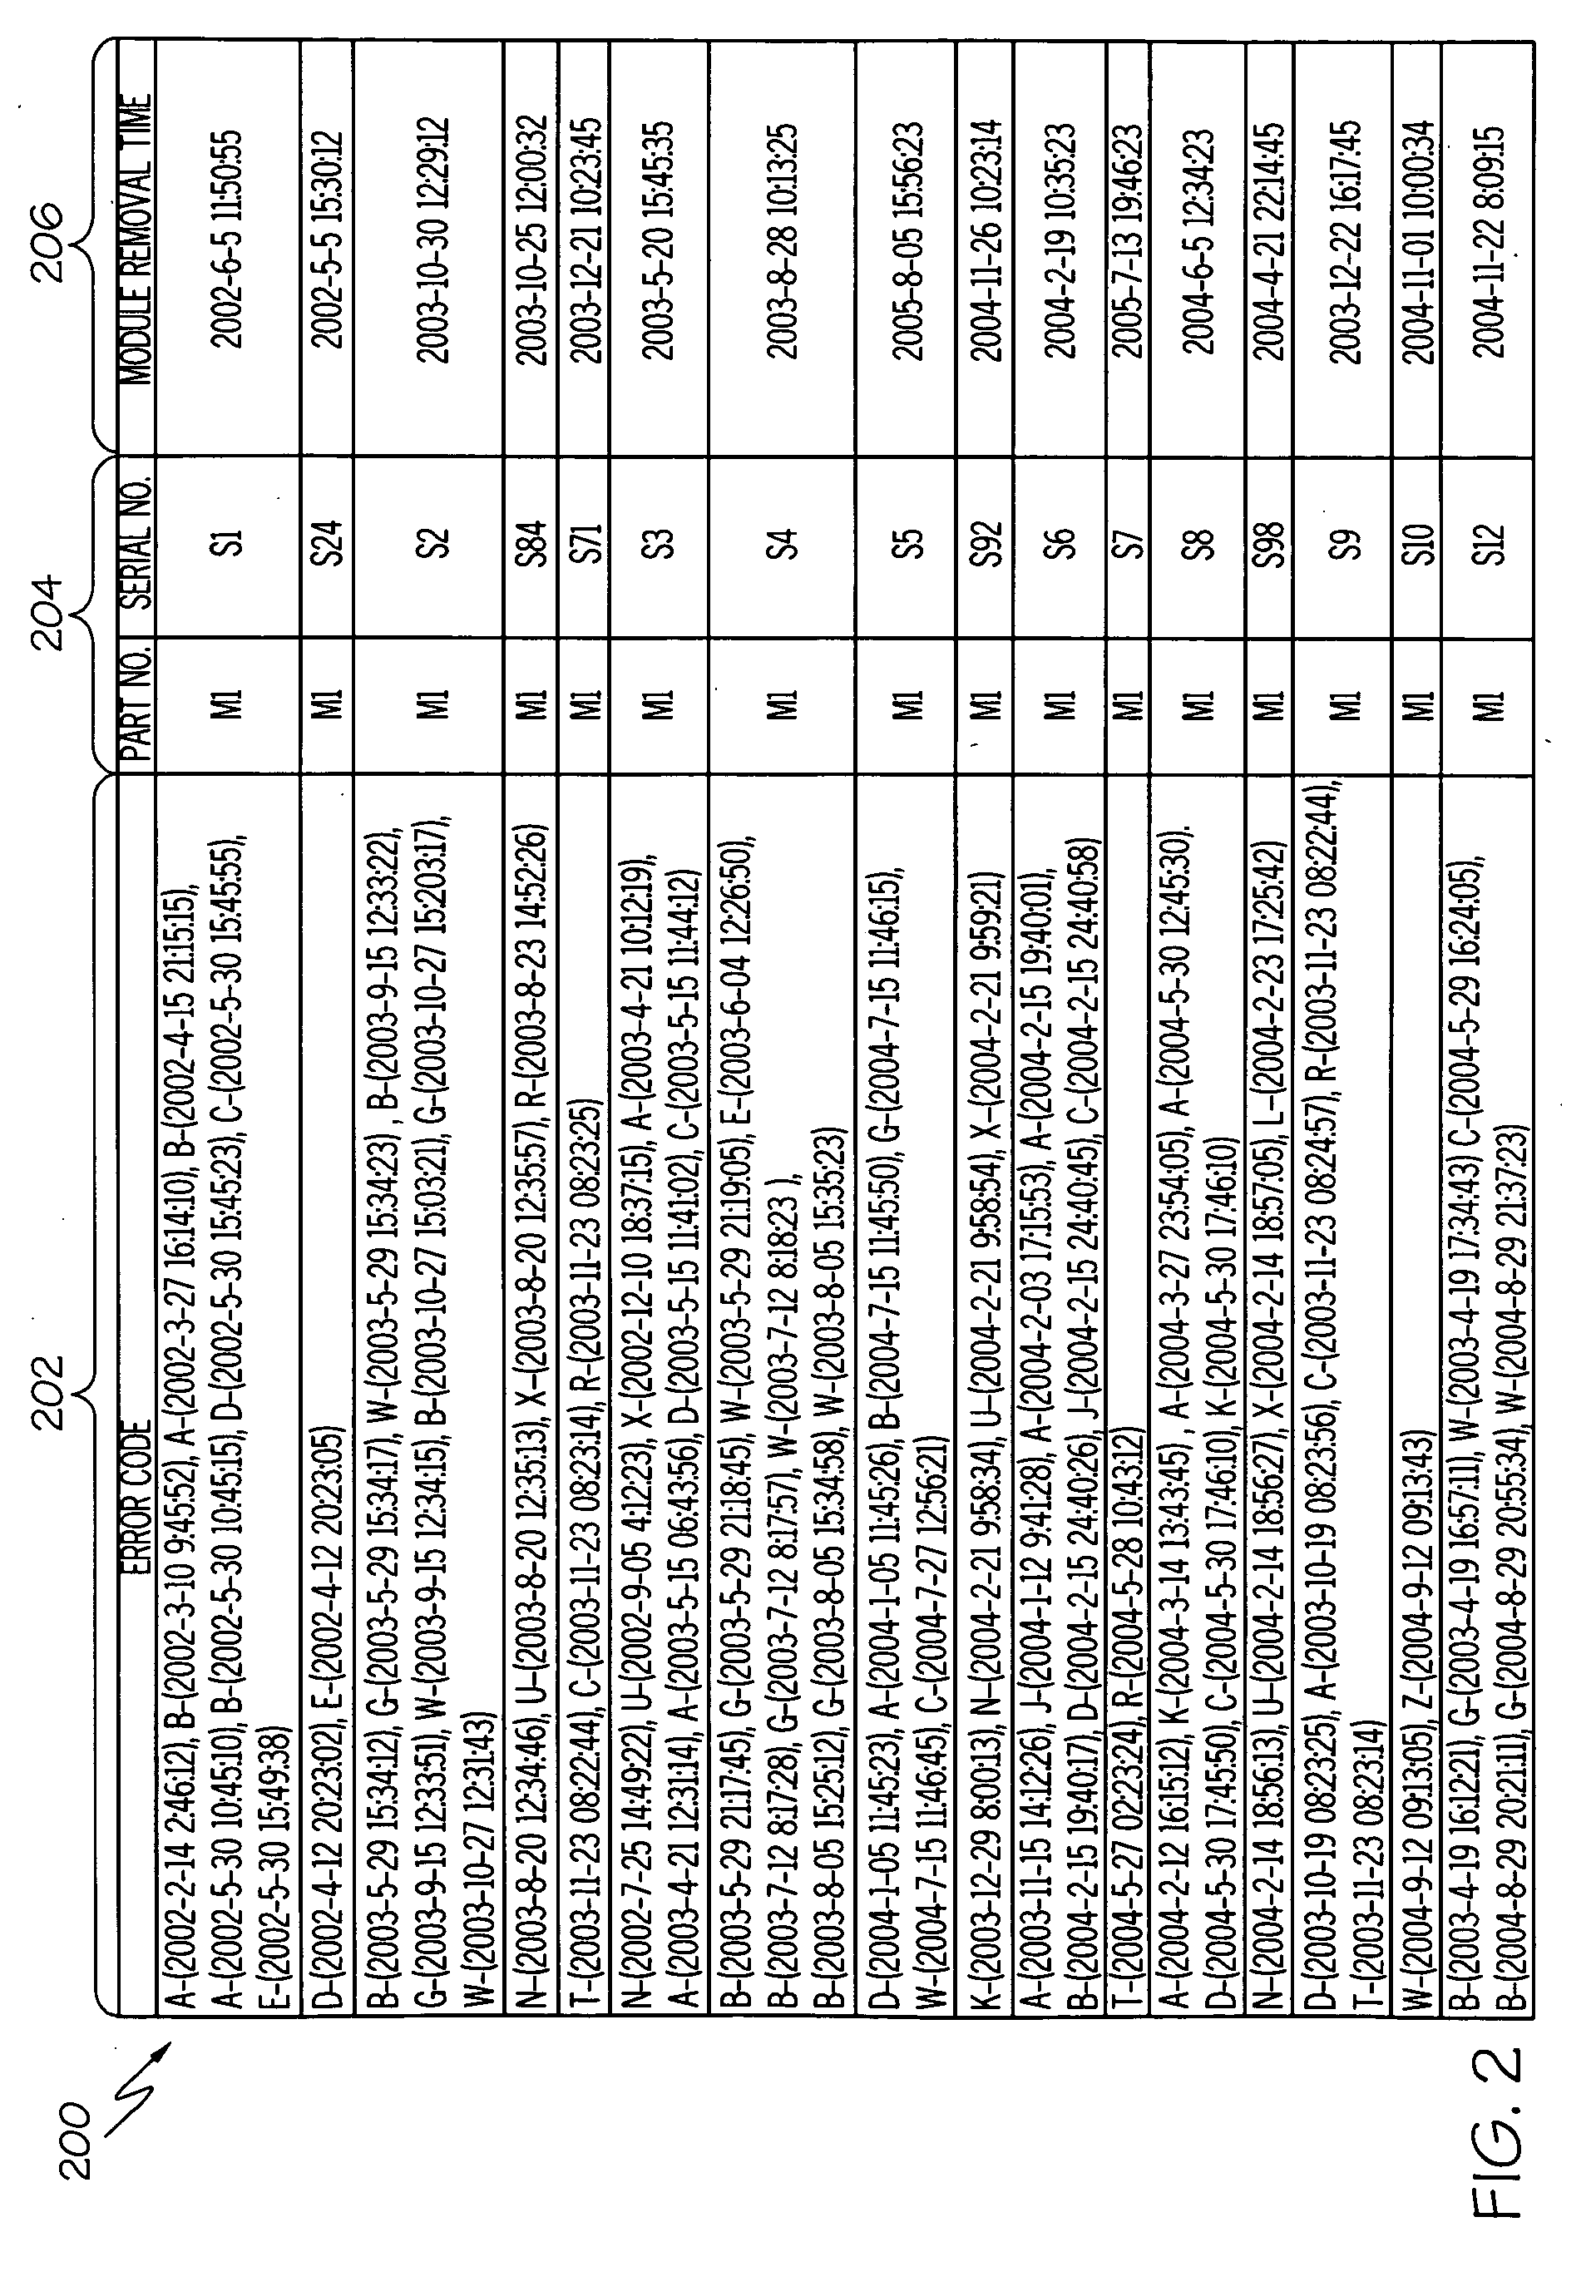 System and method for detecting temporal relationships uniquely associated with an underlying root cause